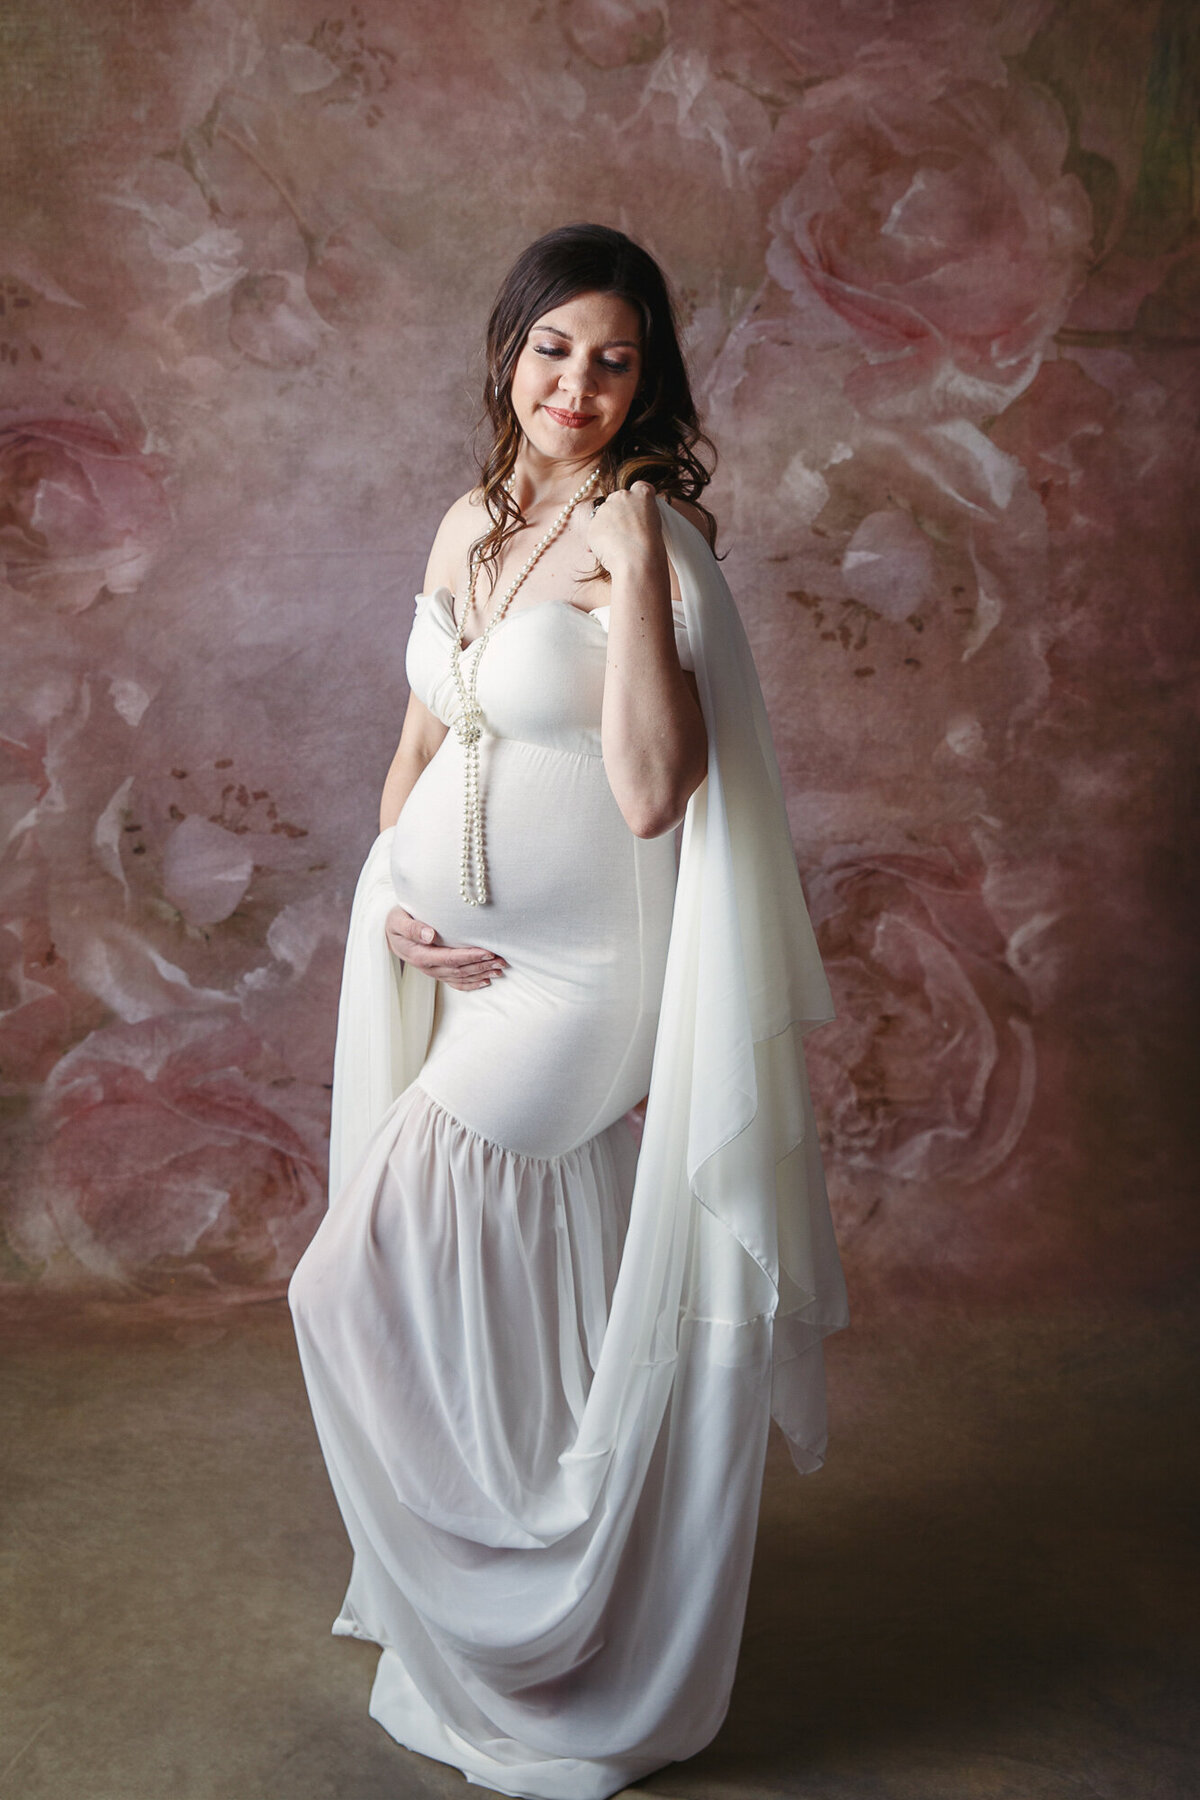 Pregnant woman in white maternity gown looking  down at her shoulder